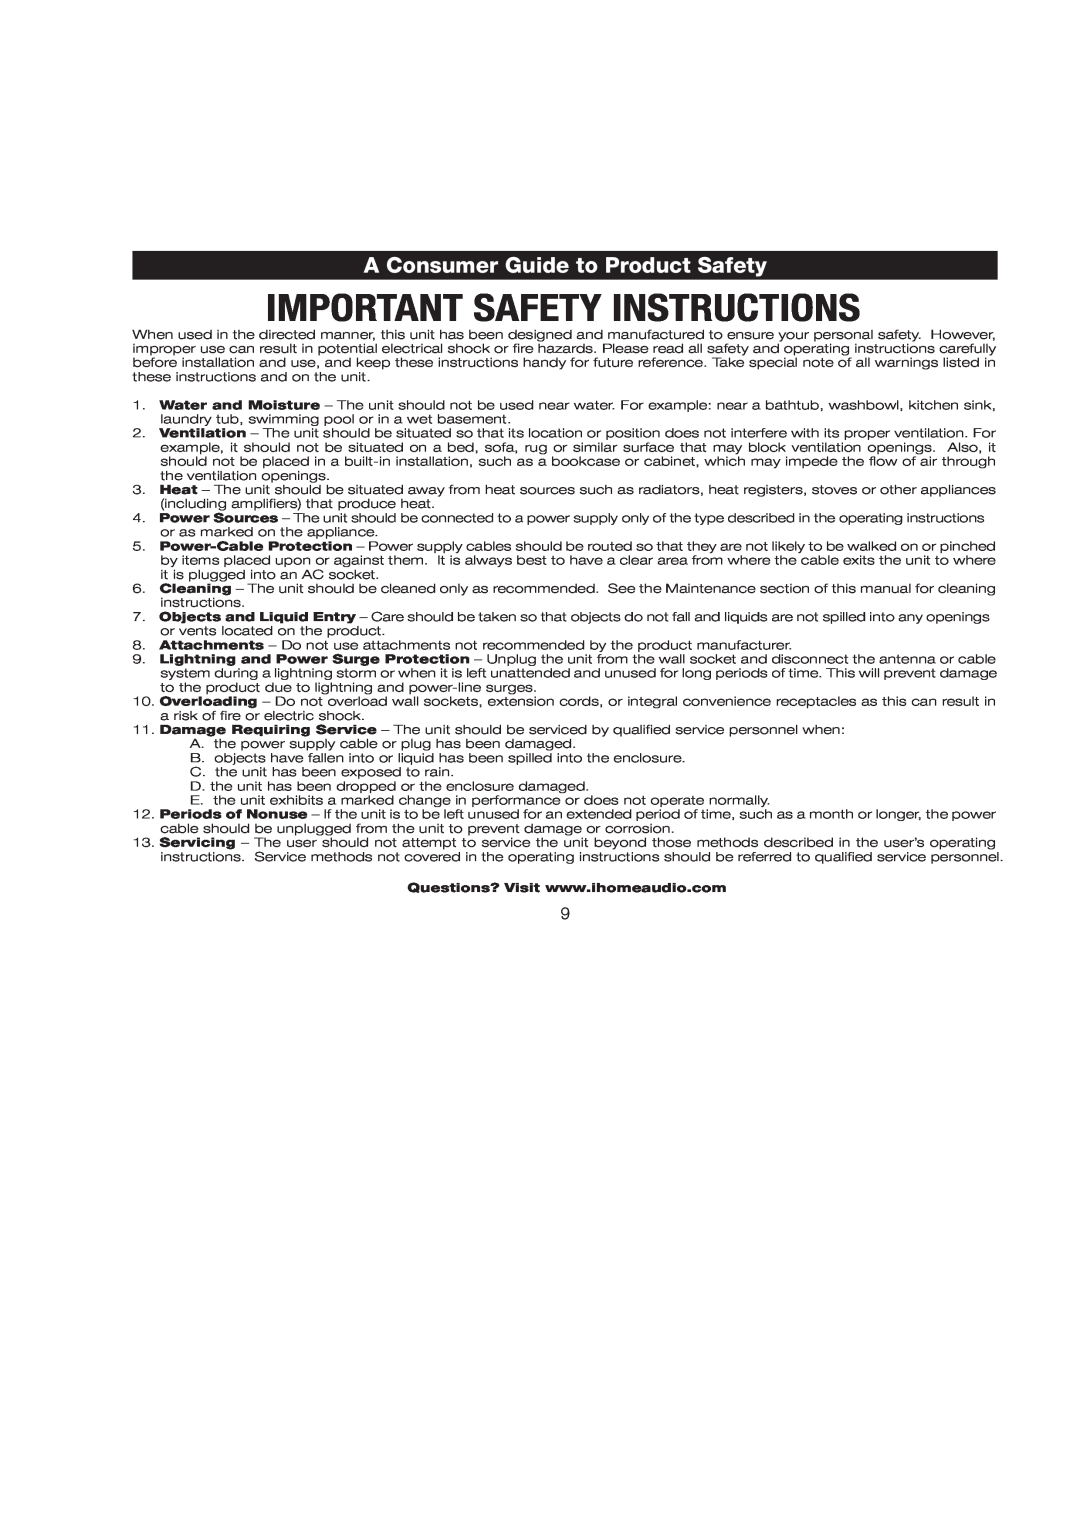 iHome iH11 manual A Consumer Guide to Product Safety 